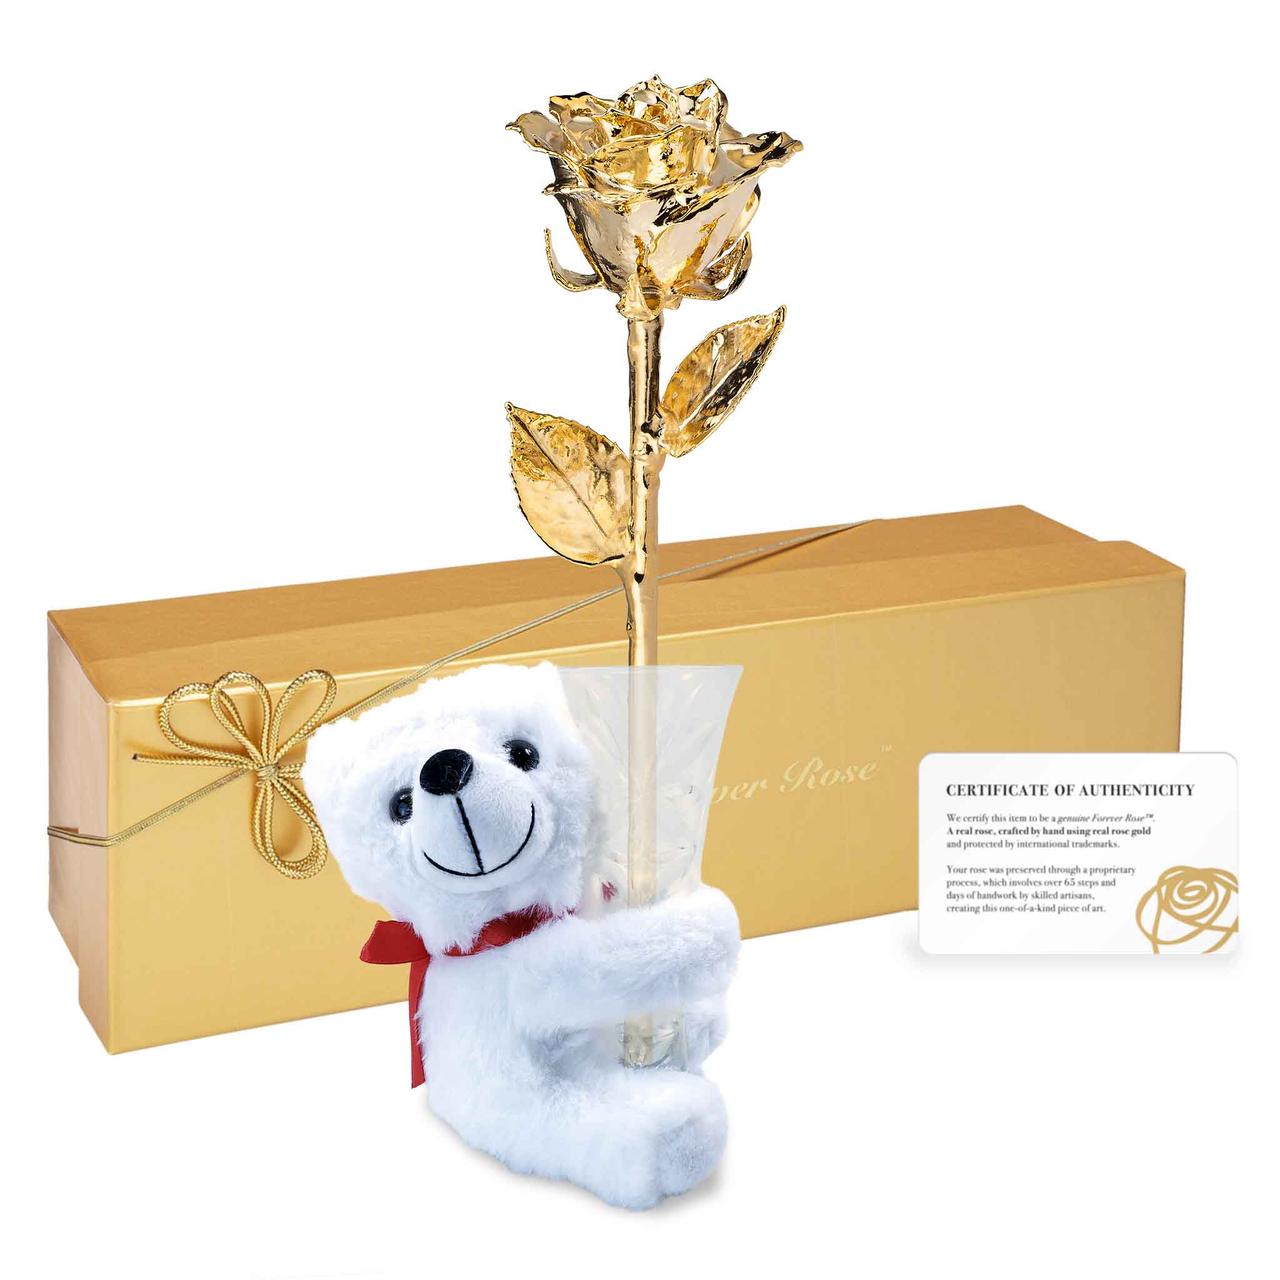 Rose dipped in gold gift set for fifth anniversary